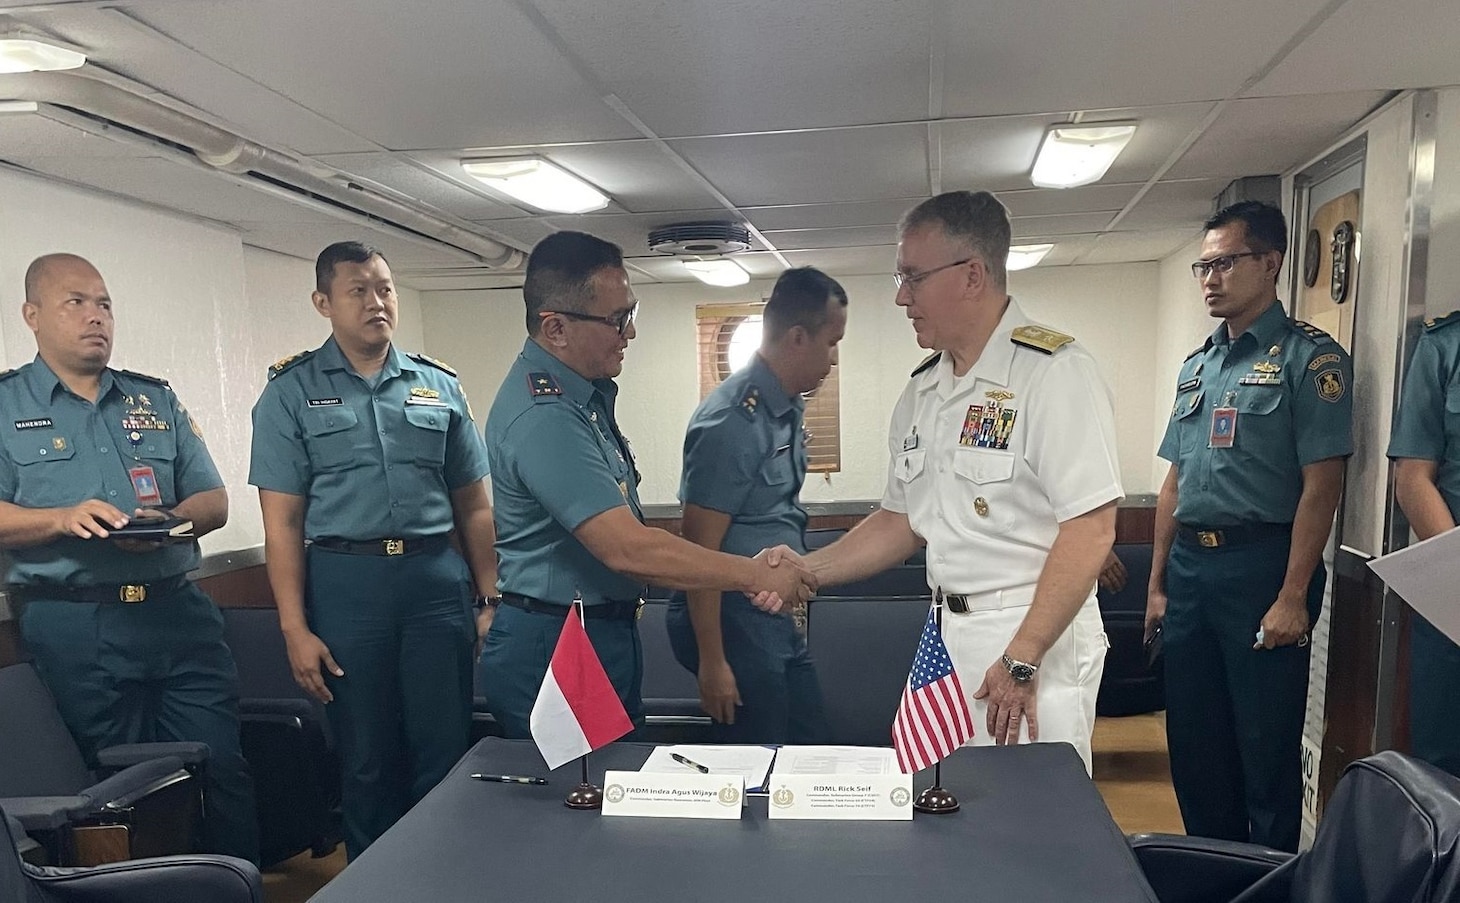 JAKARTA, Indonesia (July 22, 2022) – U.S. Navy Rear Adm. Rick Seif, commander, Submarine Group 7/Task Force 74 signs the 6th Indonesian National Military-Naval Force and U.S. Navy Submarine Force Staff Talks action items aboard the Emory S. Land-class submarine tender USS Frank Cable (AS 40) in Jakarta, Indonesia, July 22, 2022. Submarine Group 7 directs forward-deployed, combat capable forces across the full spectrum of undersea warfare throughout the Western Pacific, Indian Ocean, and Arabian Sea. (Photo courtesy of Lt. Haley Bonner)